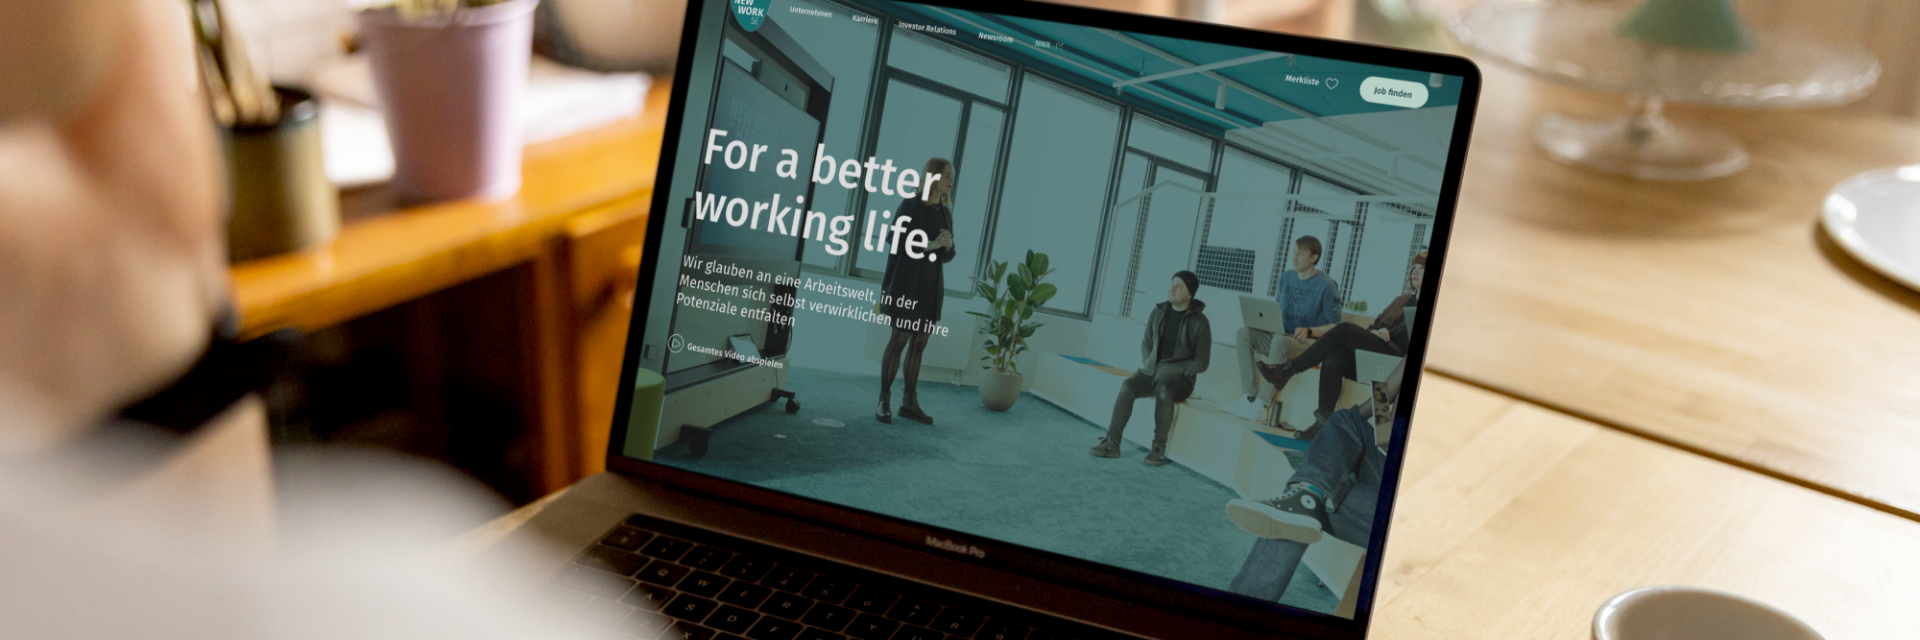 Case Study: Relaunch of the NEW WORK Corporate Website in Less Than 3 Months - Impression #1